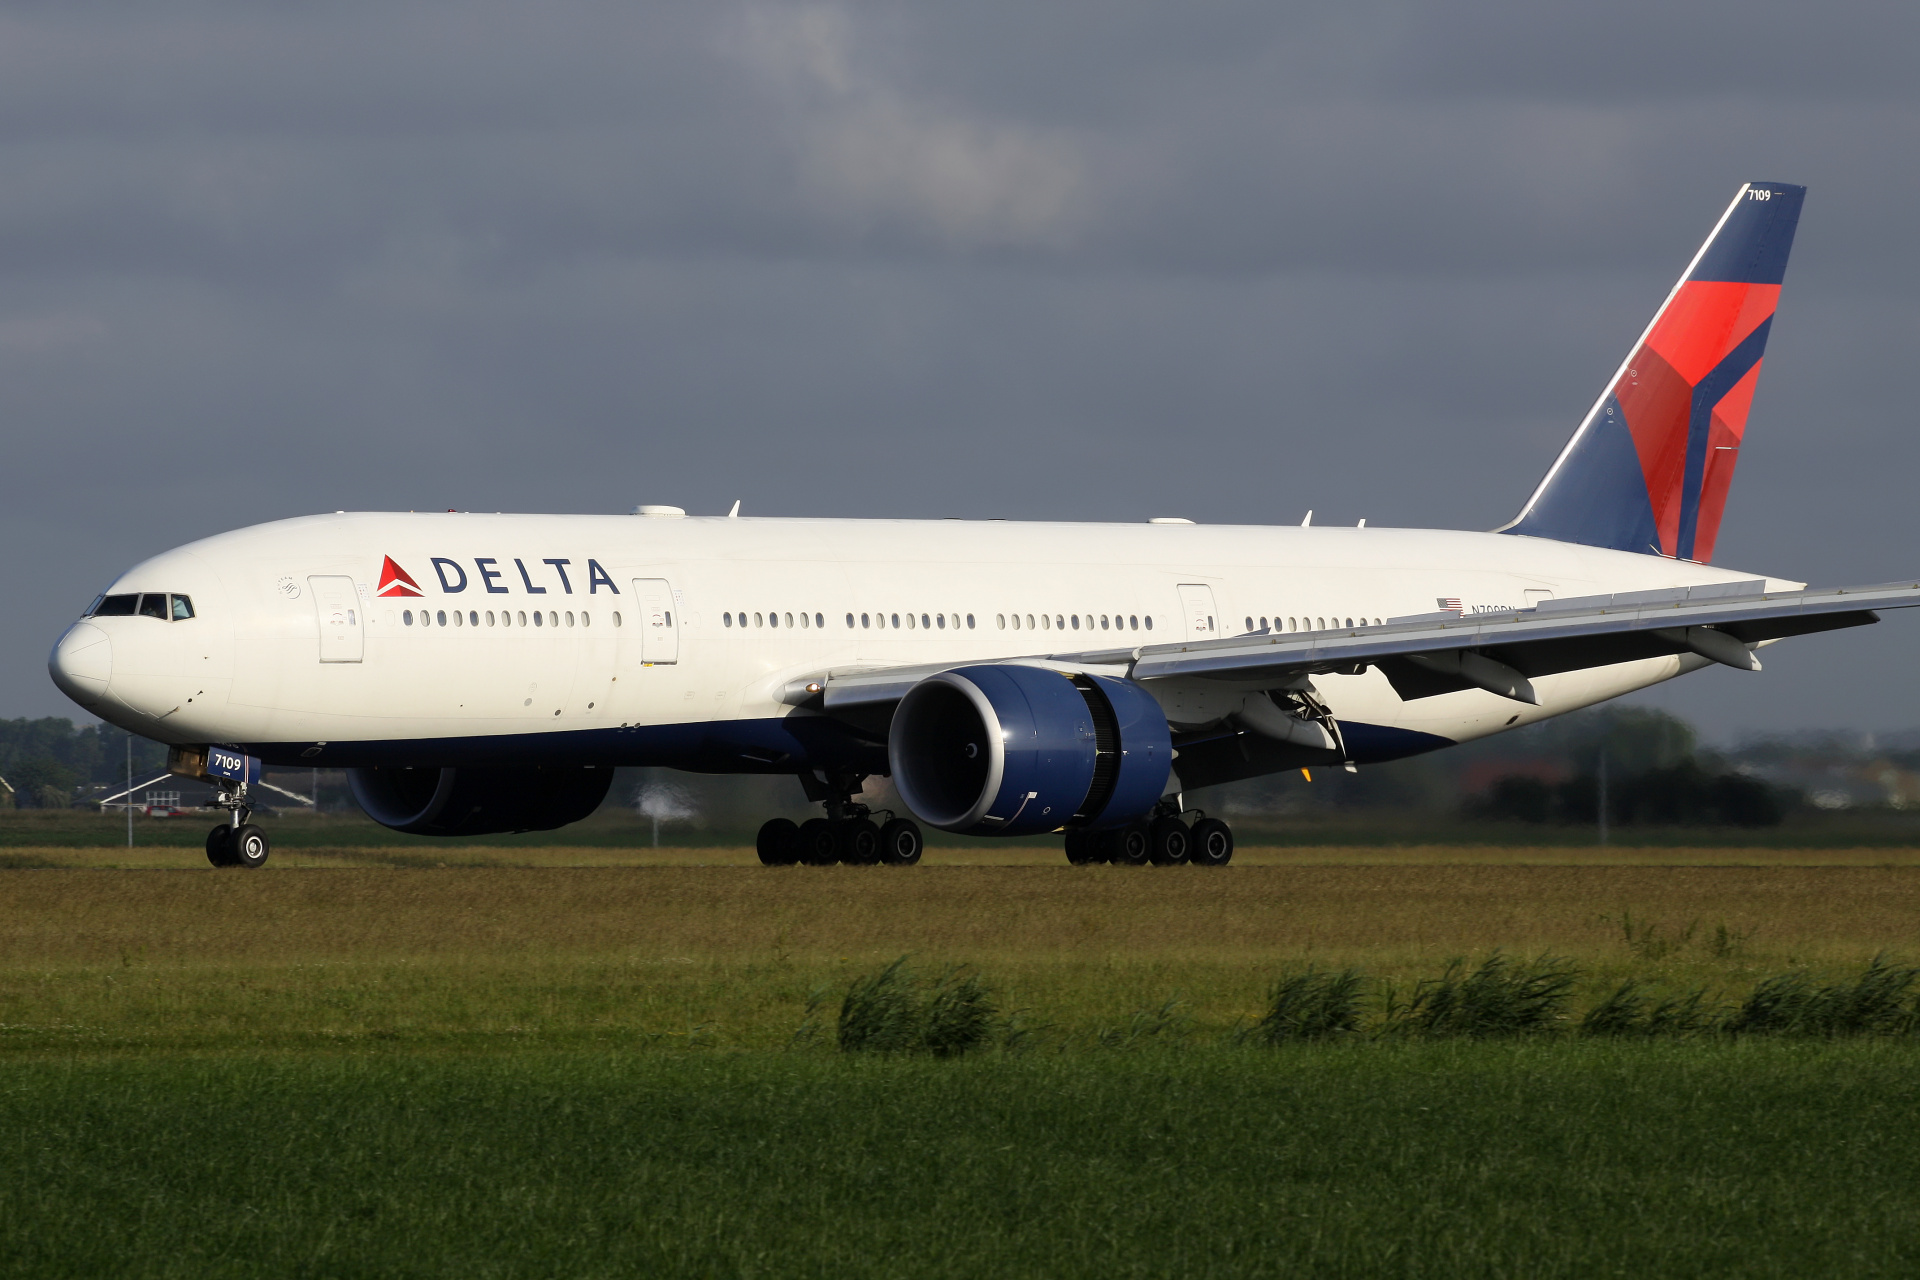 N709DN, Delta Airlines (Aircraft » Schiphol Spotting » Boeing 777-200LR)